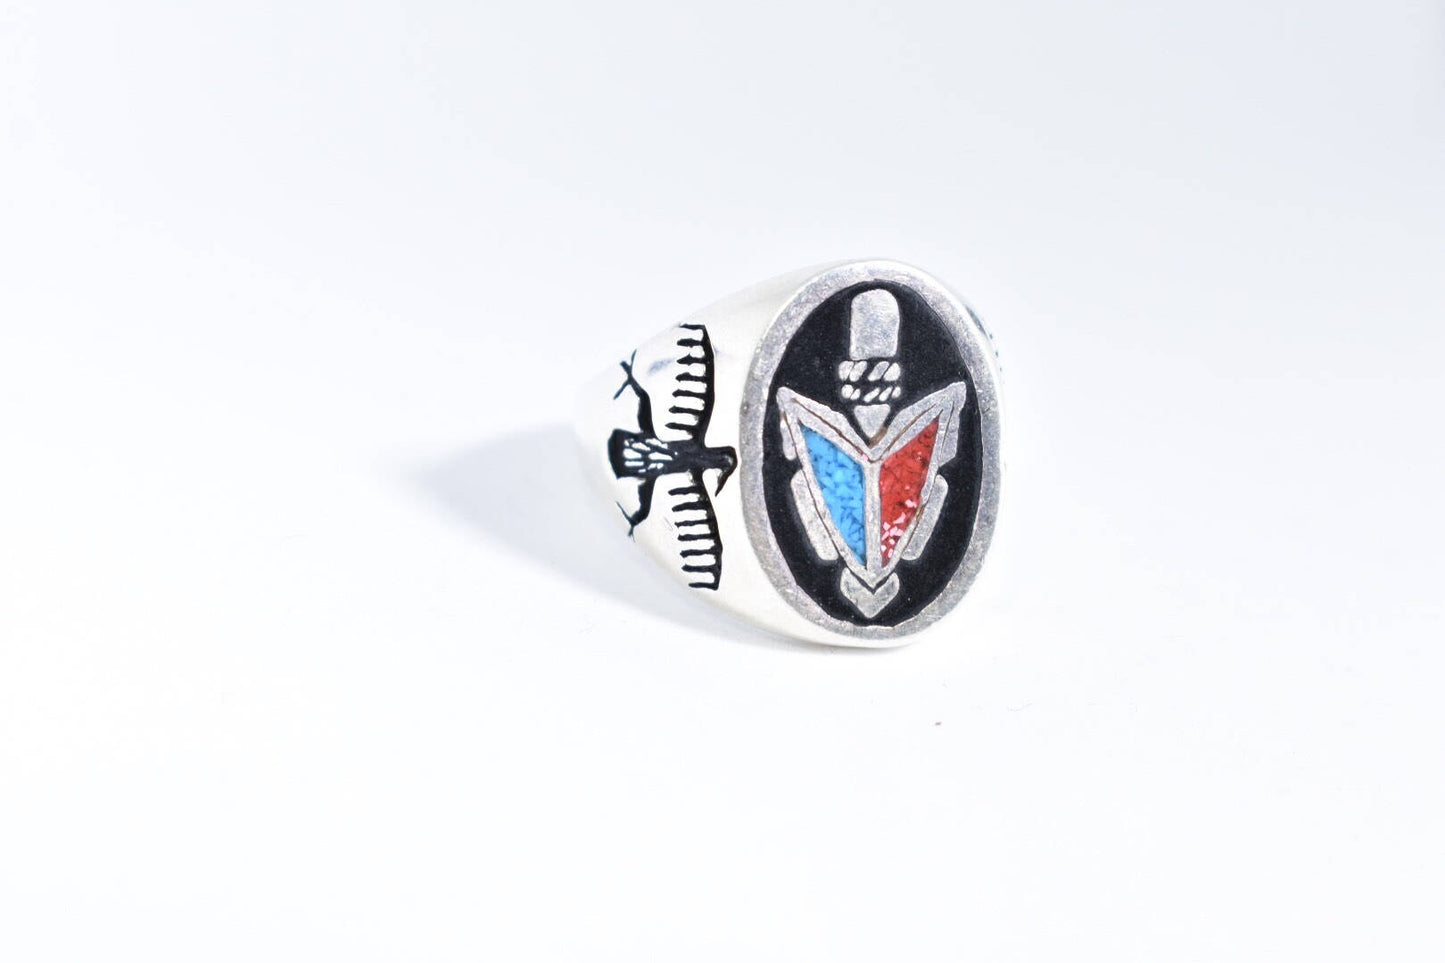 Vintage Native American Style Southwestern Stone Turquoise Inlay Tomahawk Mens Ring